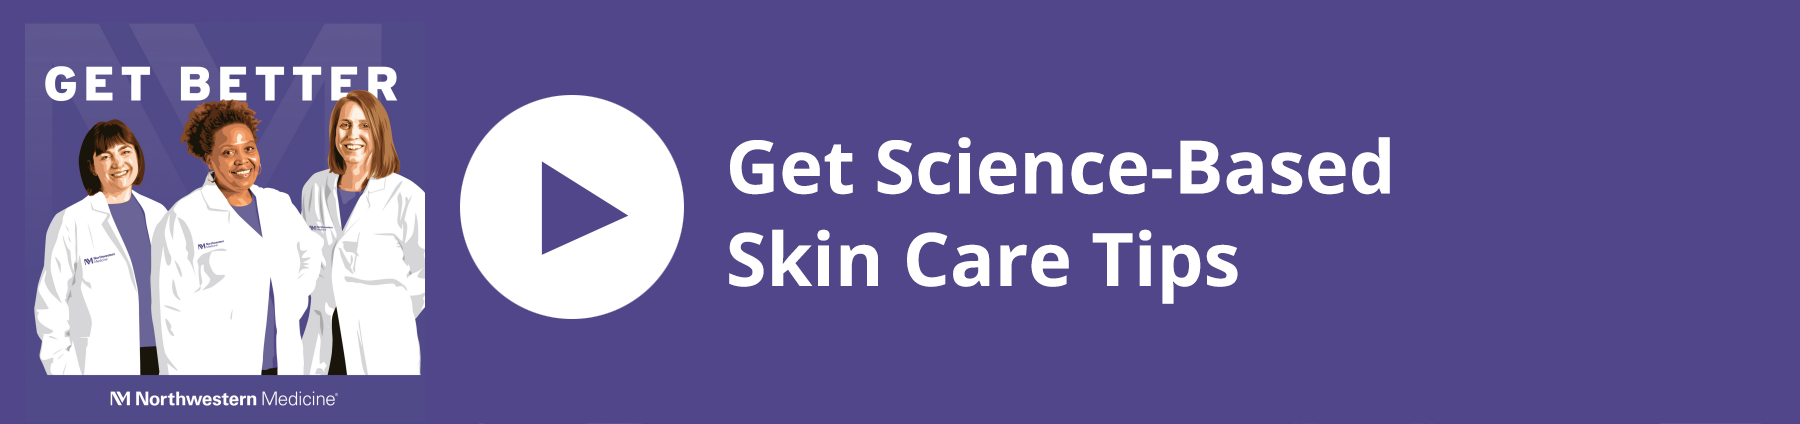 Get Science-Based Skin Care Tips [Podcast] Play Button with Get Better Logo and illustration of three hosts